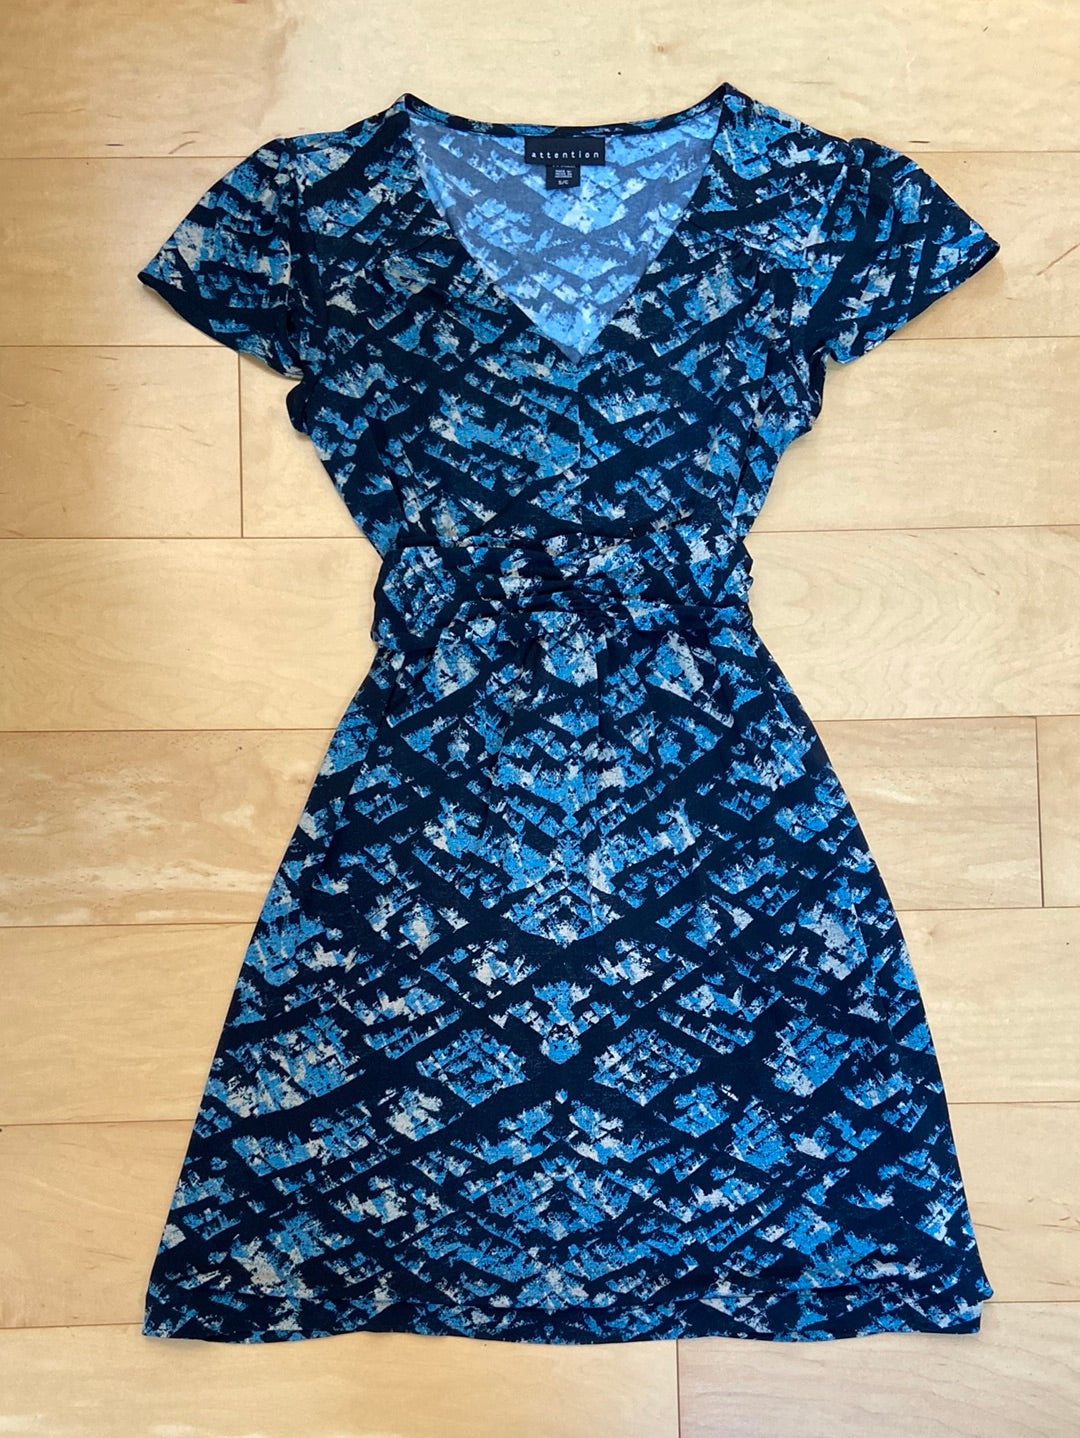 PRETTY PRINT Attention Black and Blue Dress Size S